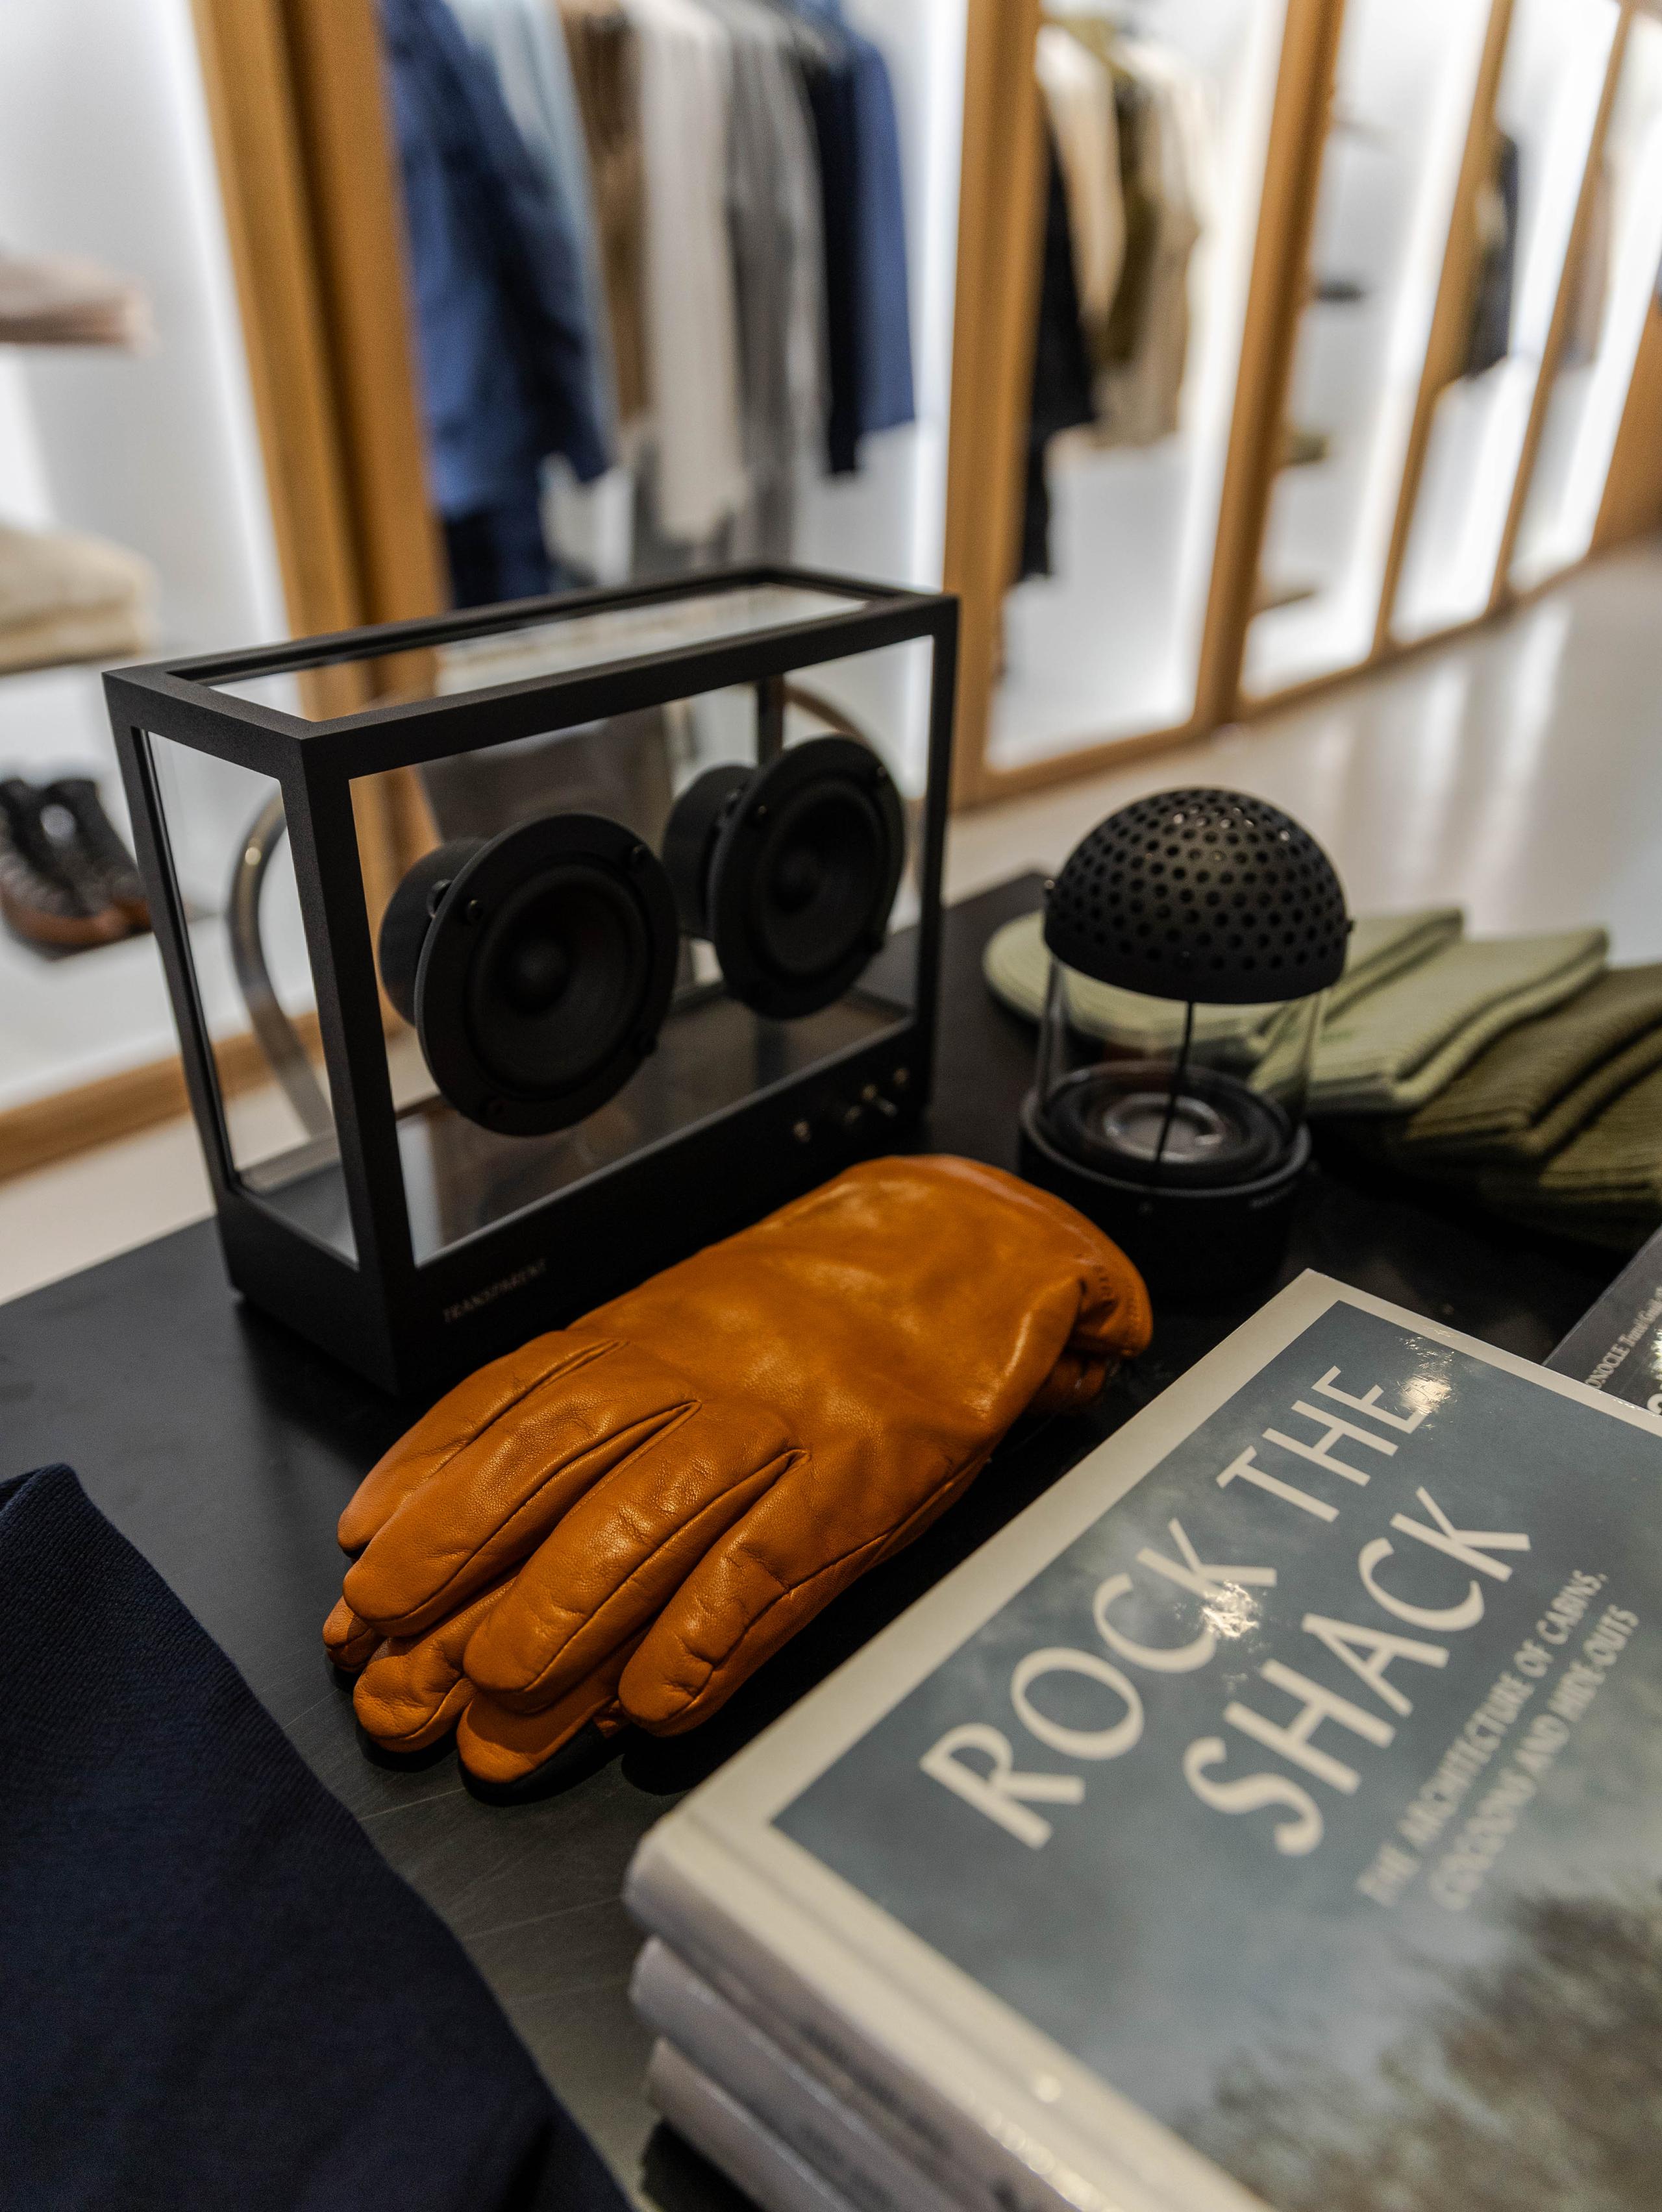 View of gloves and books on table